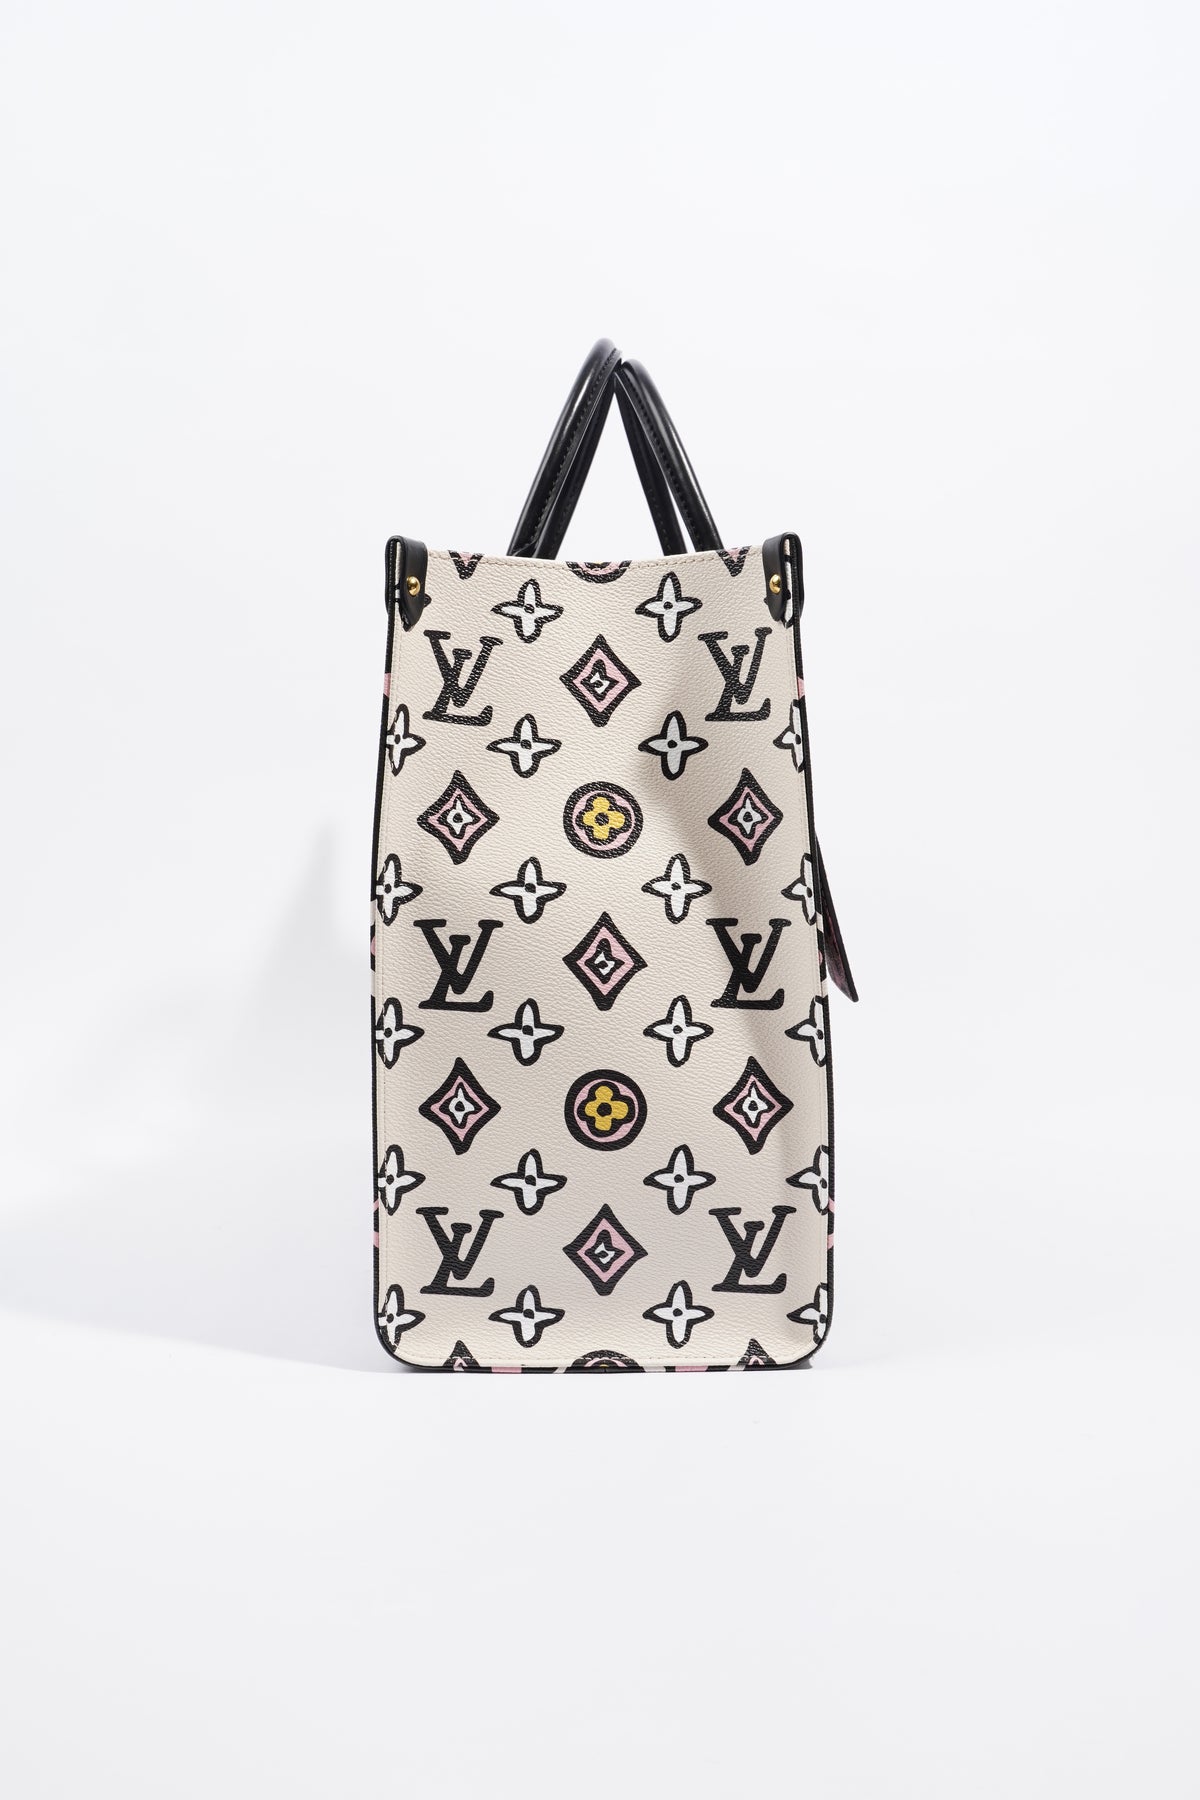 LOUIS VUITTON, Onthego Wild At Heart Gm Giant Black Multicolor Monogram,  Brown, (One Size), New, Tradesy